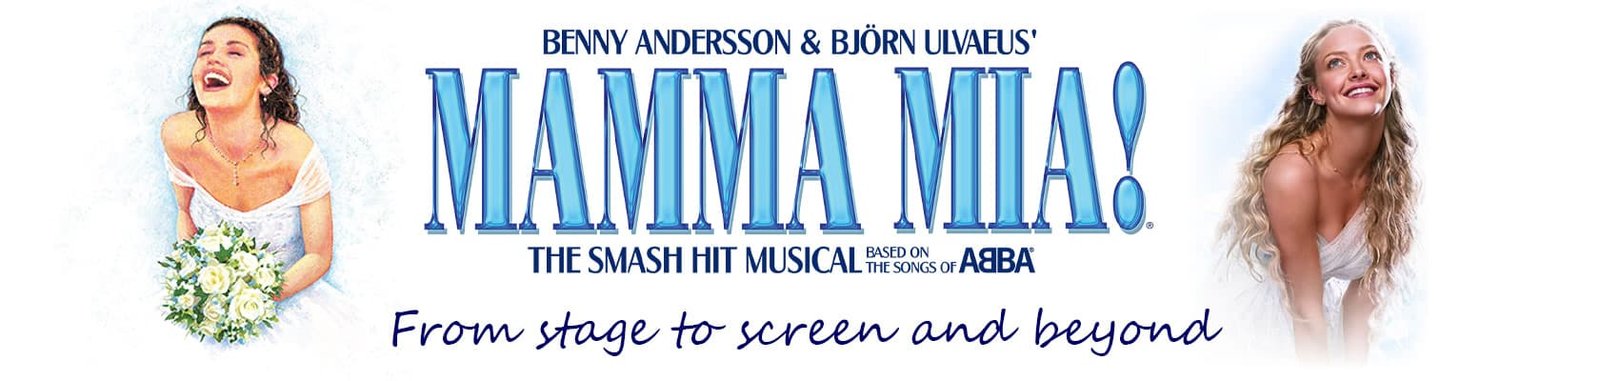 MAMMA MIA! Stage to screen and beyond banner artwork